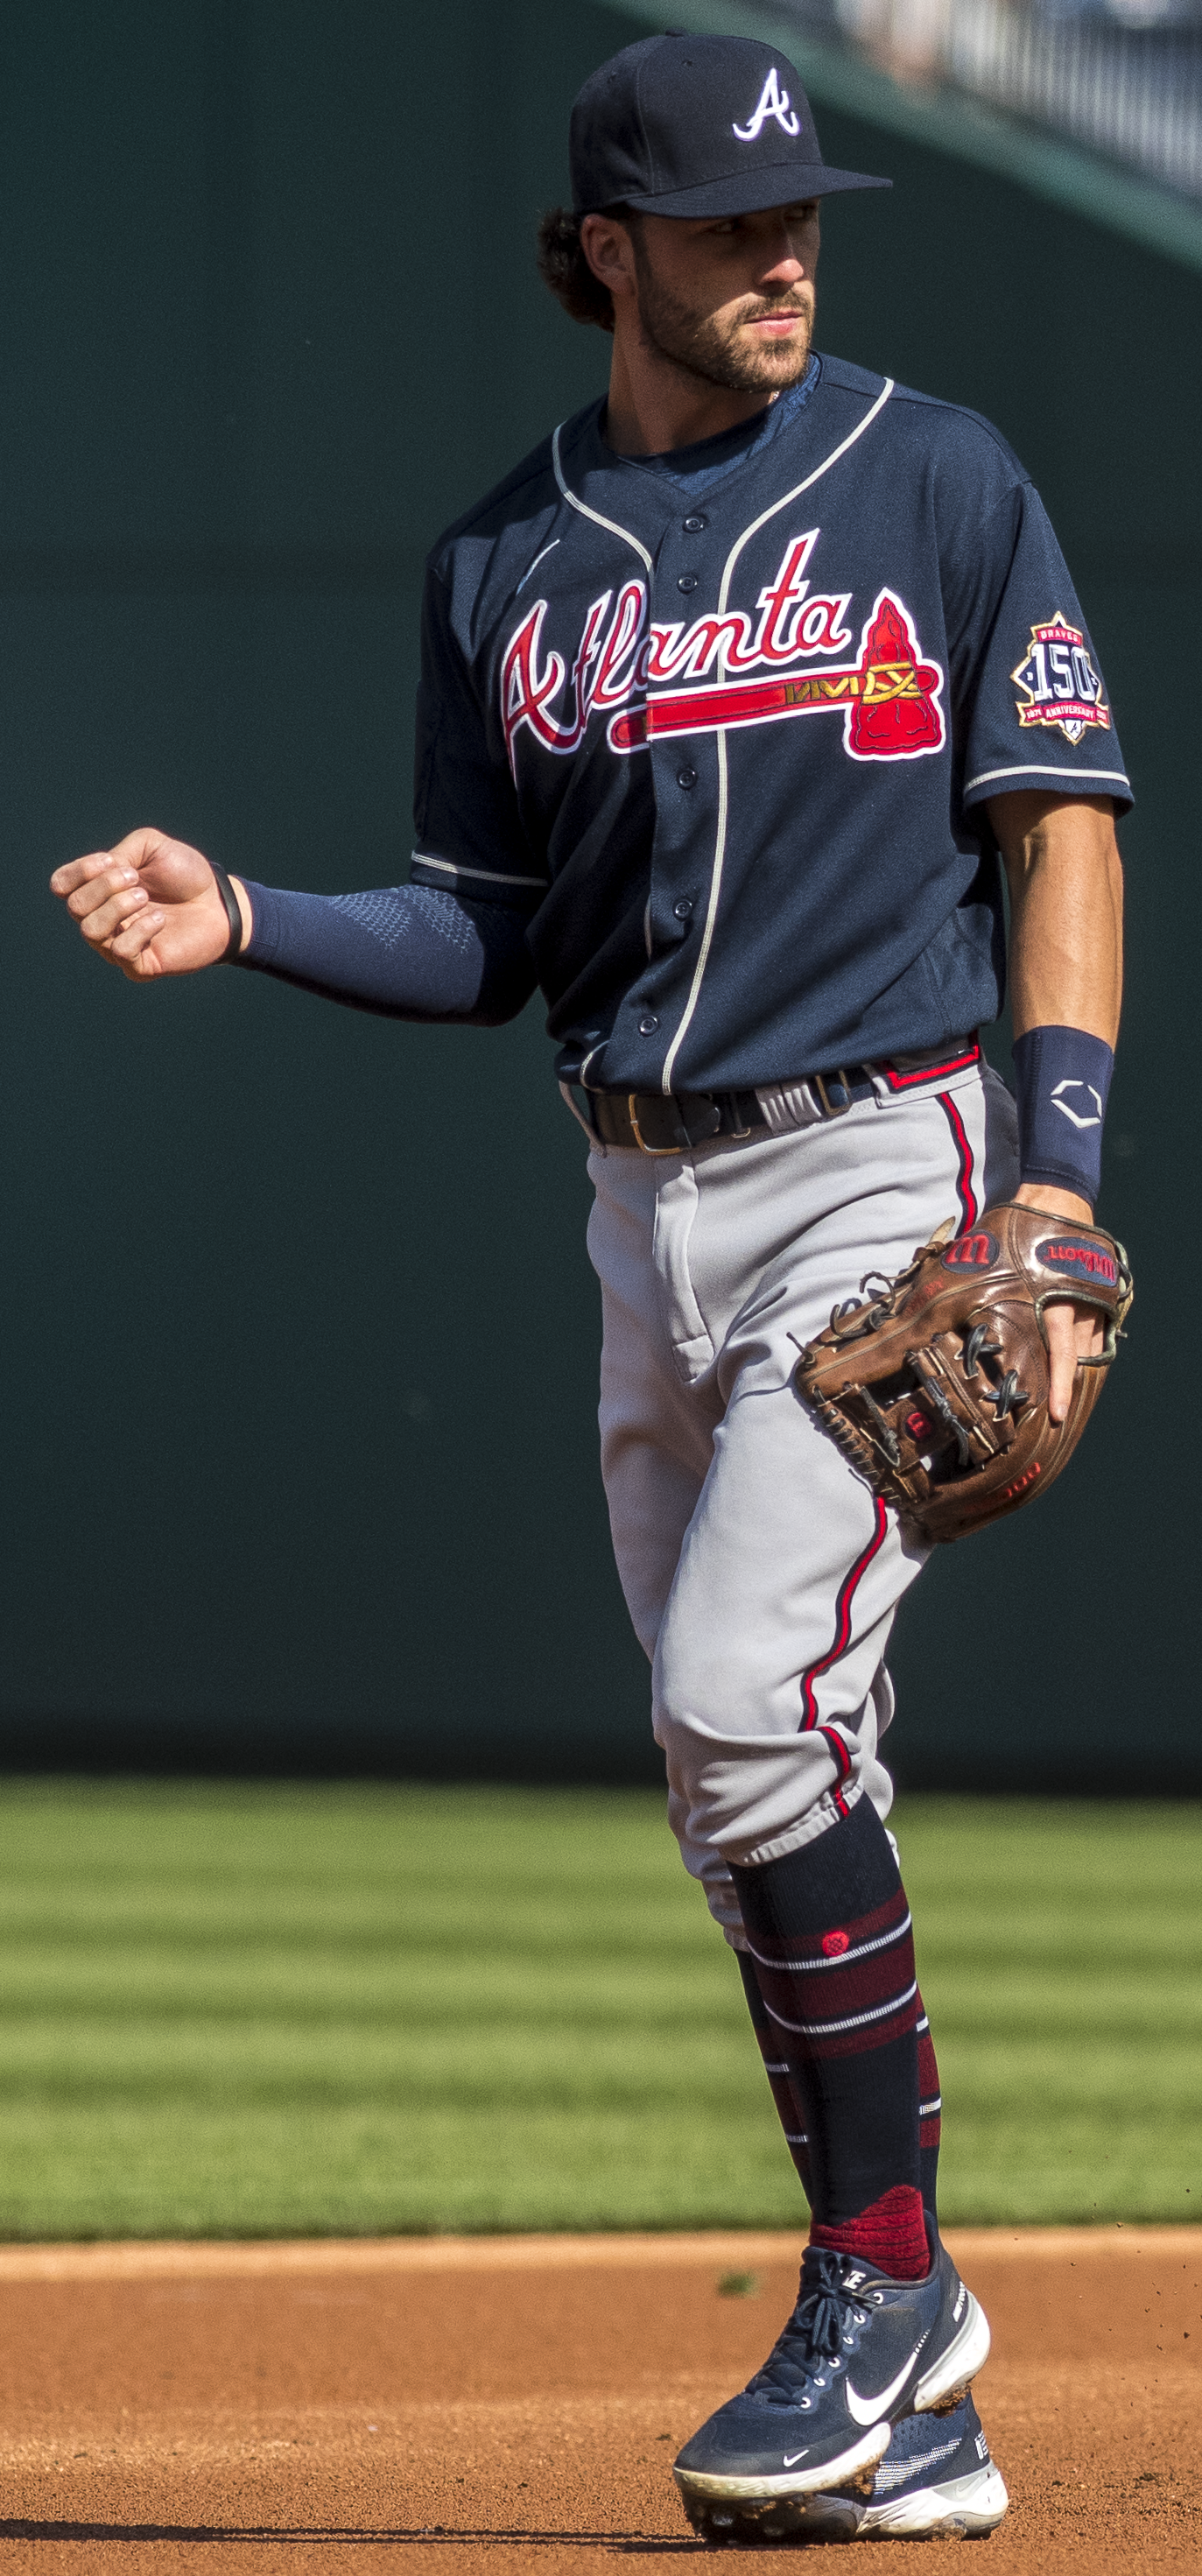 File:Dansby Swanson throws ball in from Nationals vs. Braves at